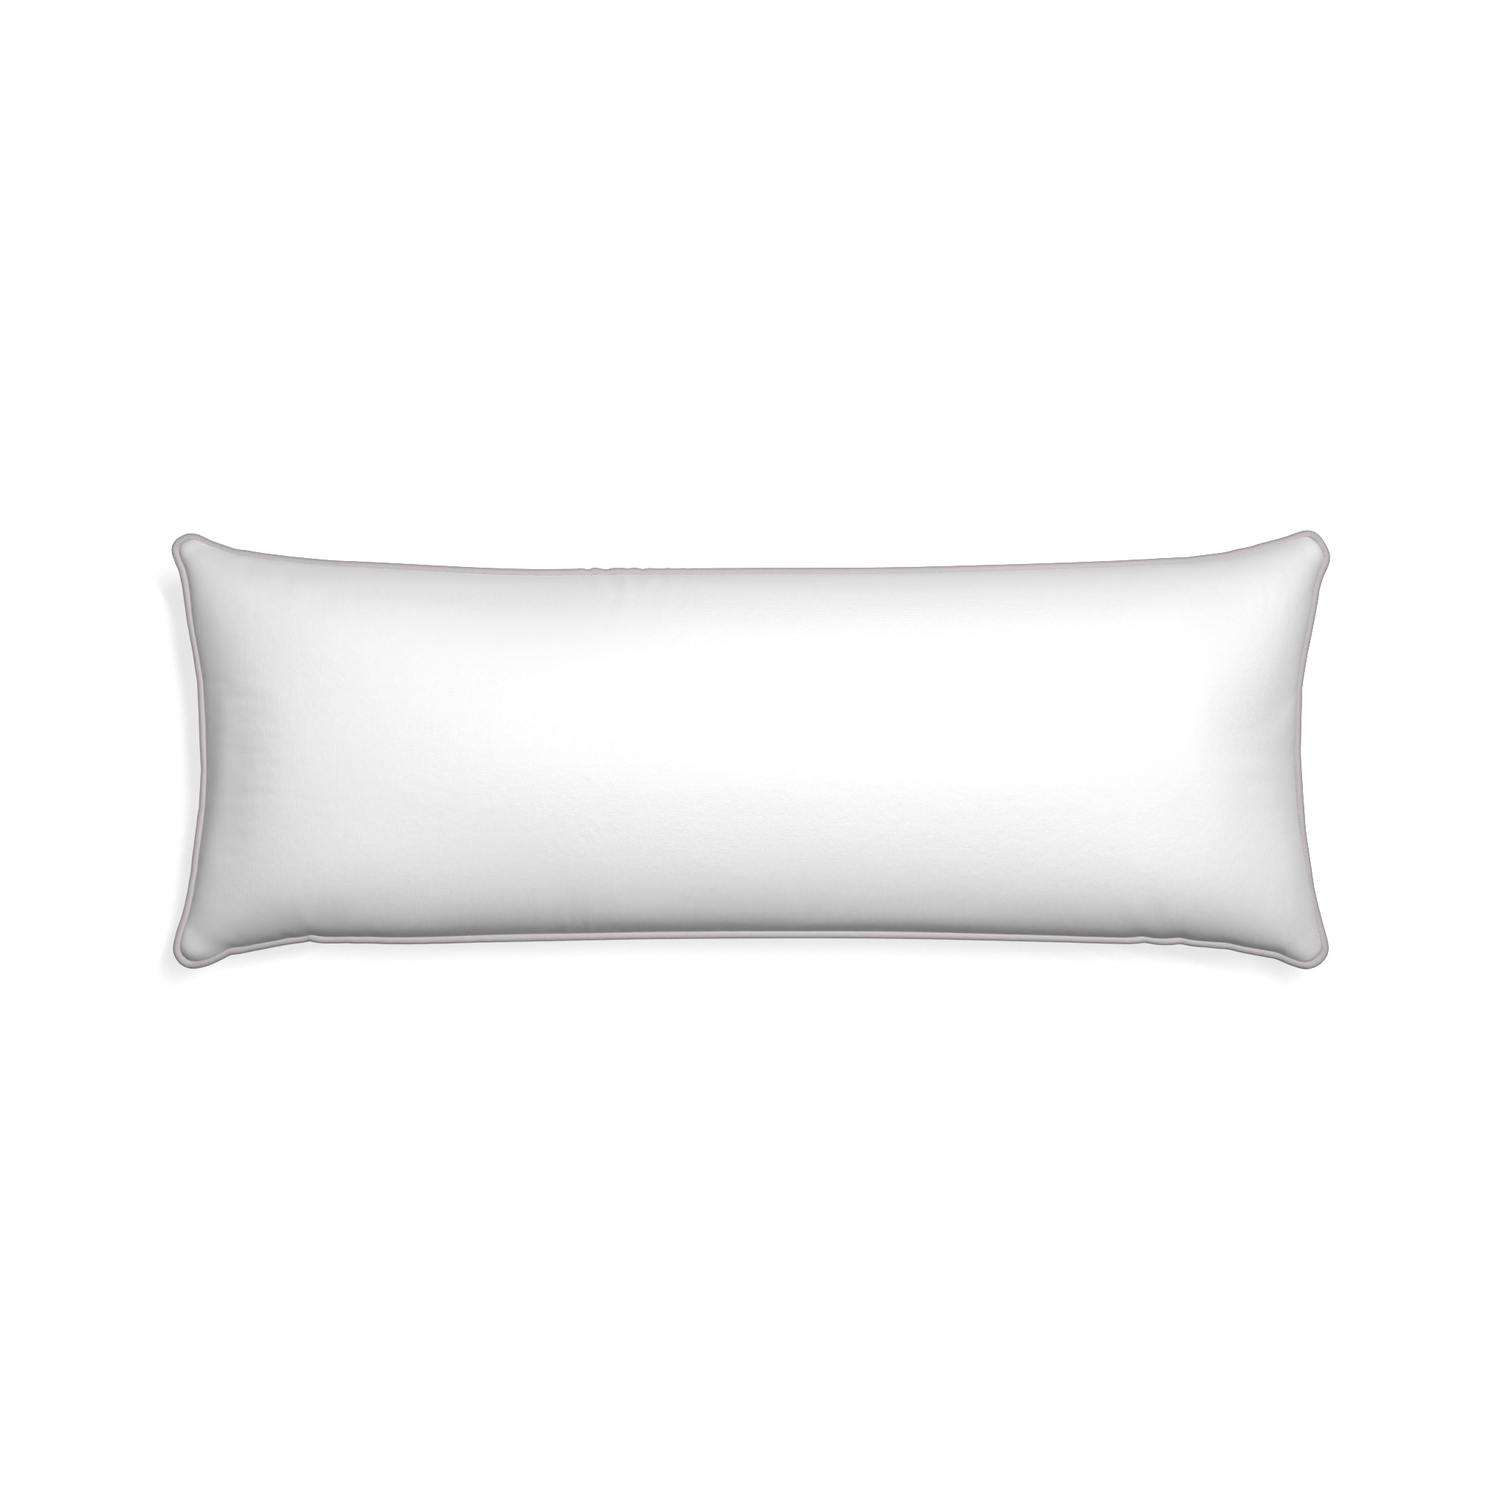 Xl-lumbar snow custom pillow with pebble piping on white background